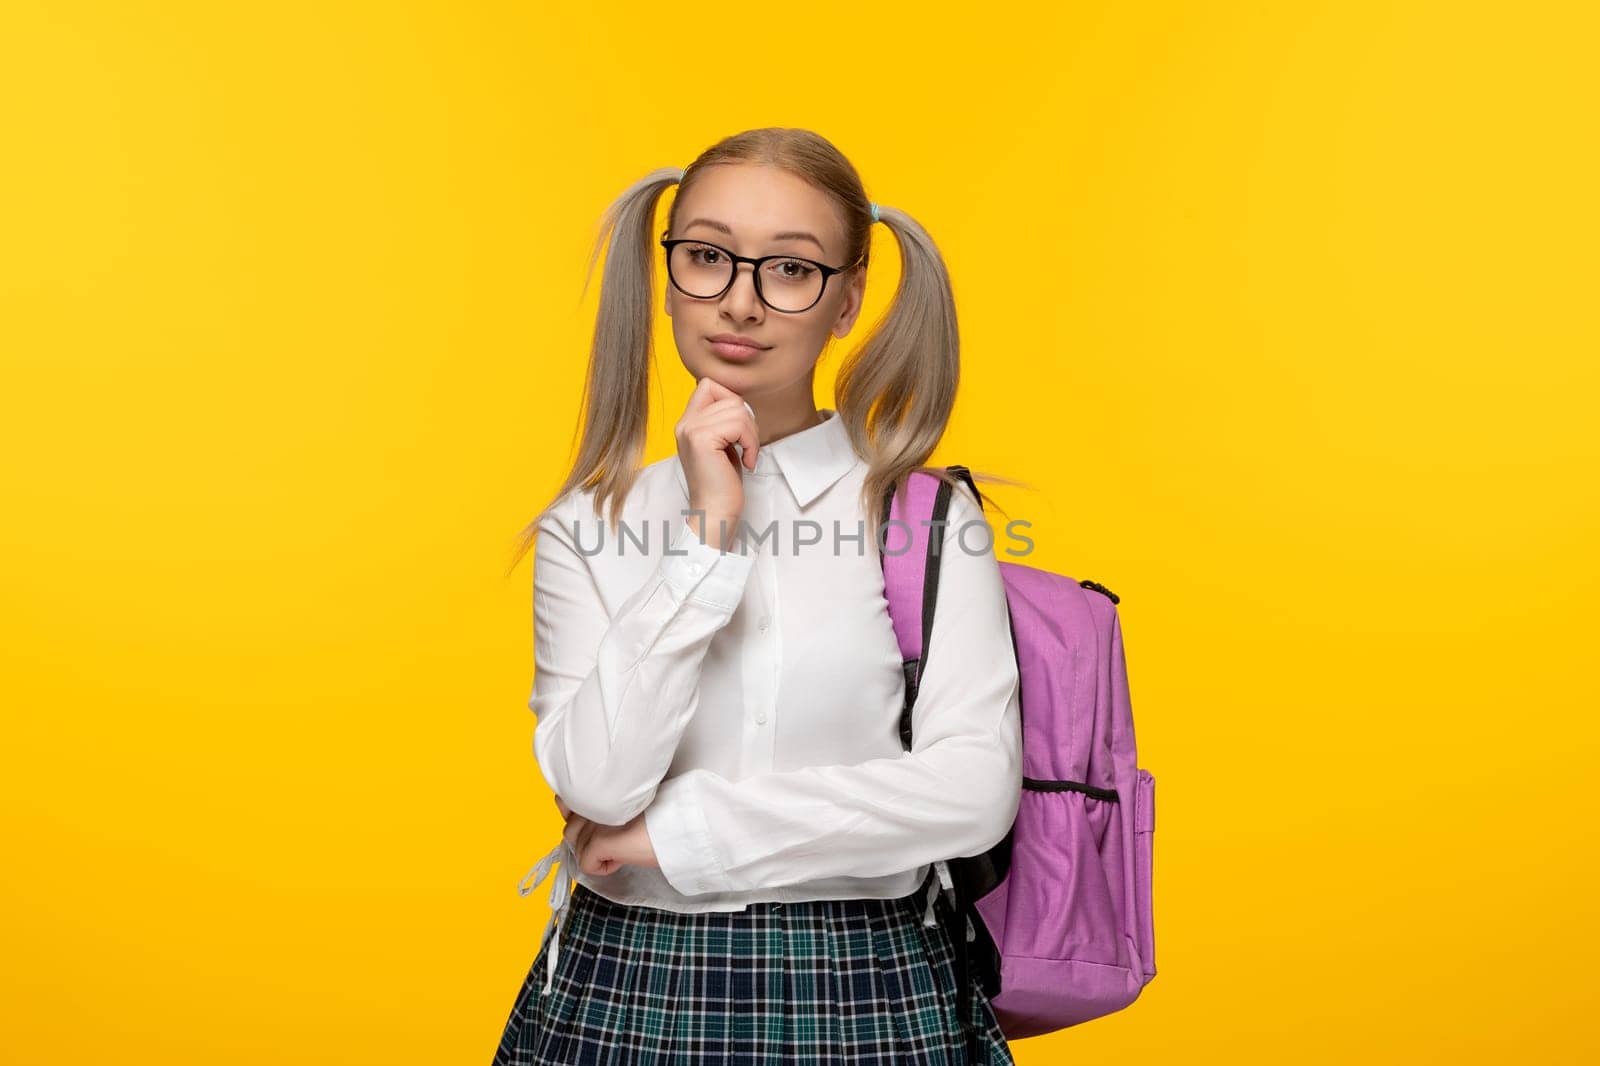 world book day serious schoolgirl in glasses and pink backpack on yellow background